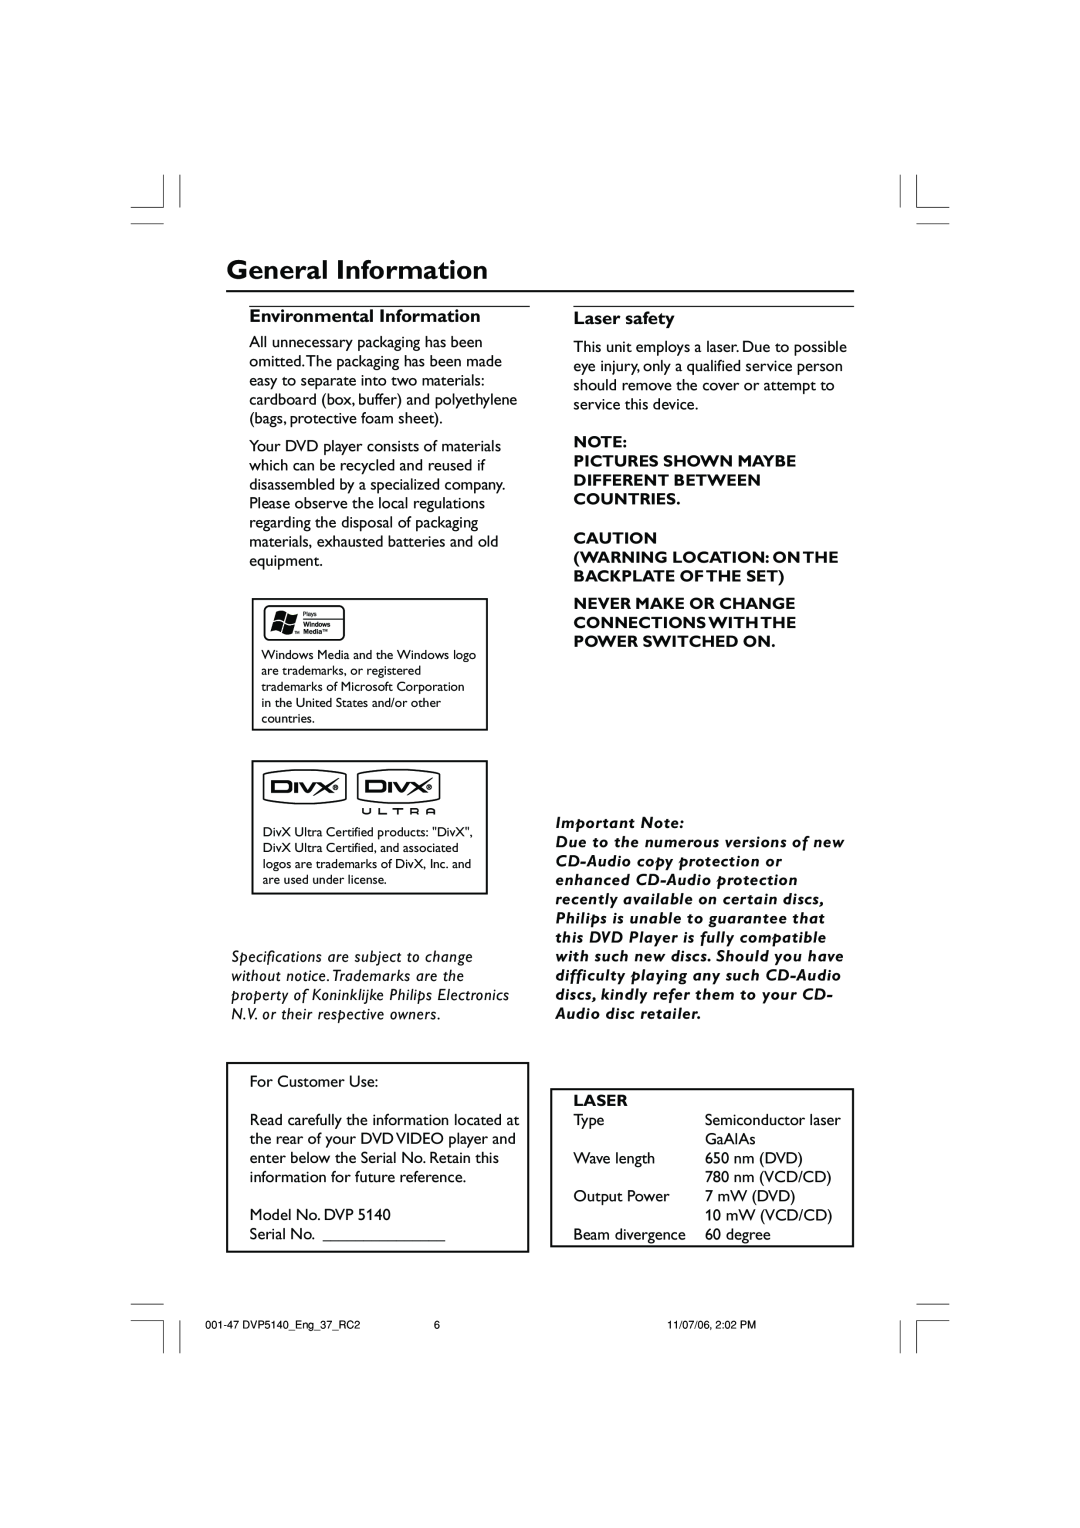 Philips DVP5140 General Information, Environmental Information, Laser safety, Connections With The Power Switched On 